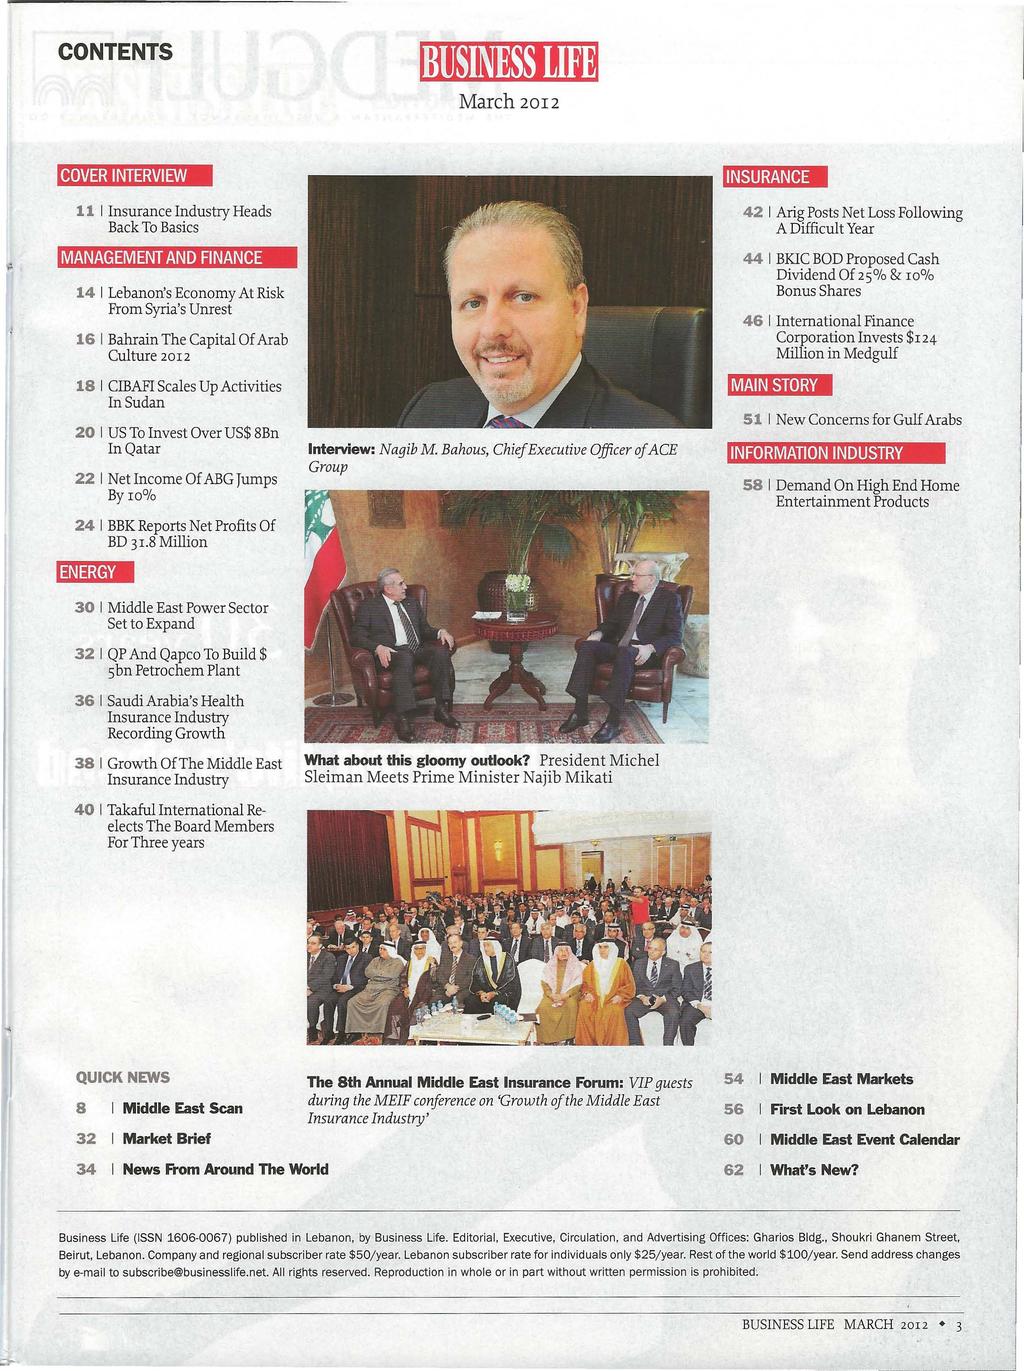 CONTENTS March 2012 COVER INTERVIEW 11 I Heads Back To Basics MANAGEMENT AND FINANCE 14 I Lebanon's Economy At Risk From Syria's Unrest 16 I Bahrain The Capital Of Arab Culture 2012 18 I CIBAPI